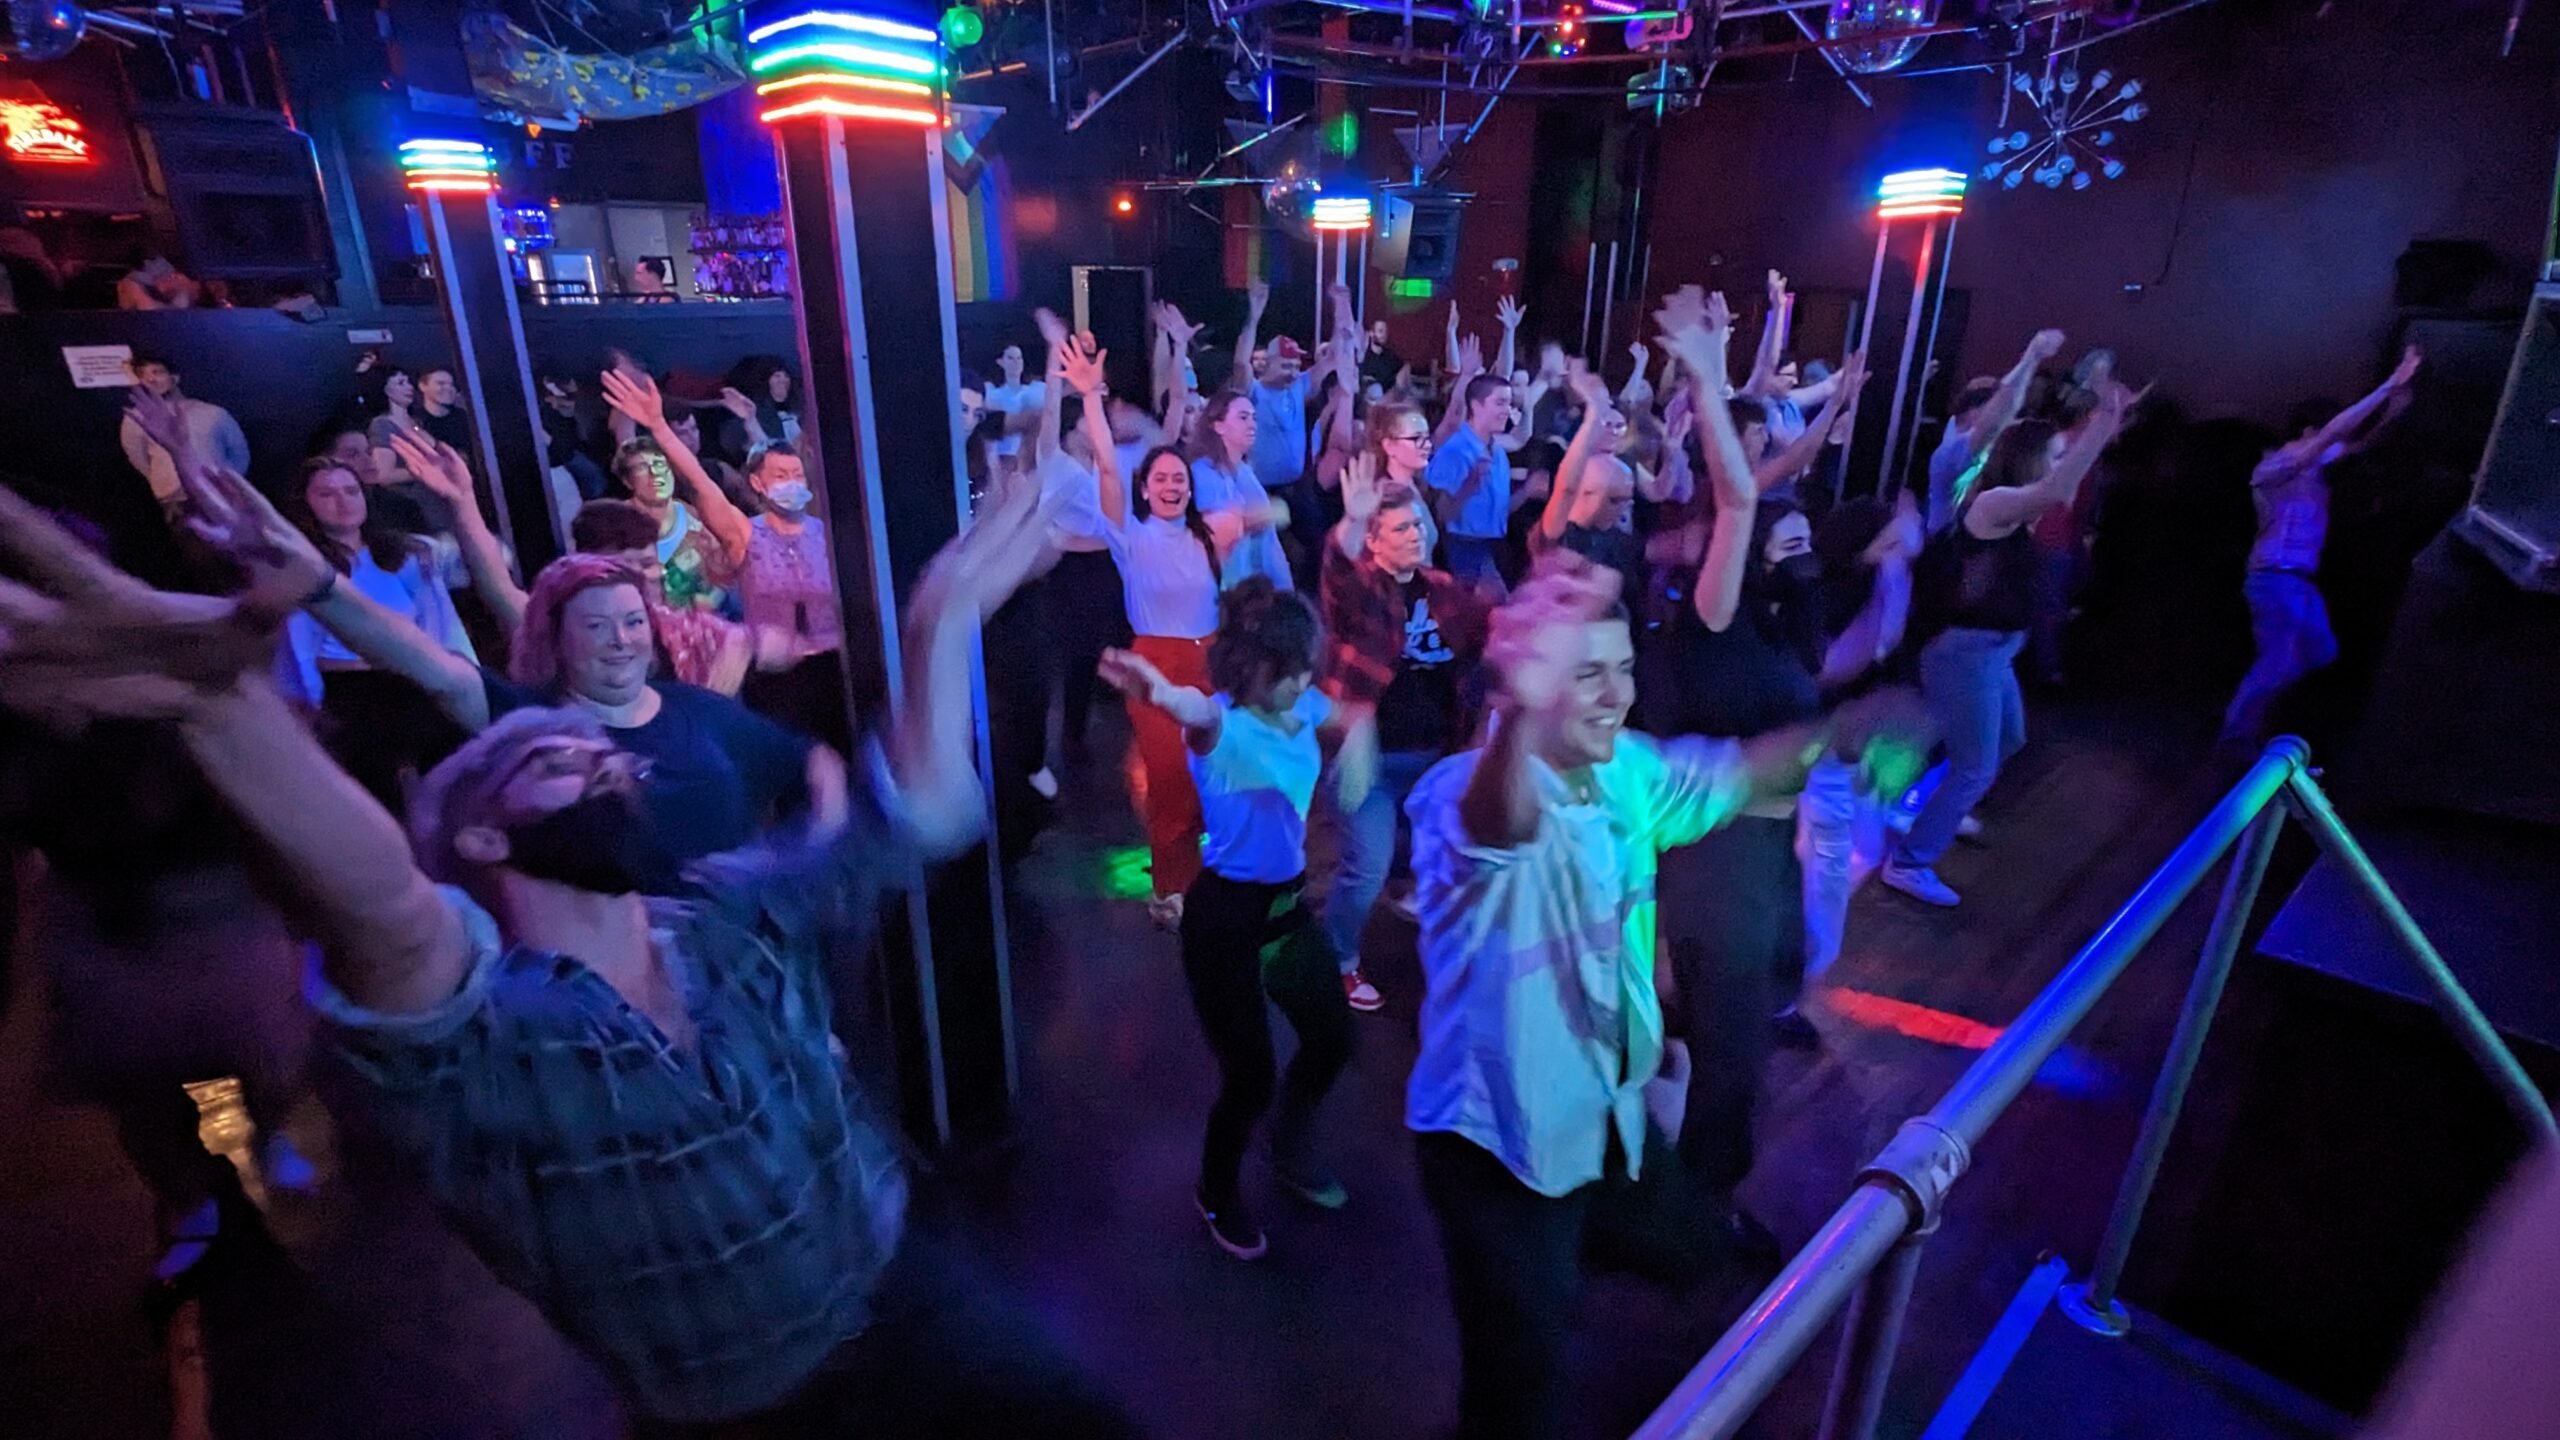 A group of approximately 35 people with their hands in the air and smiles on their faces on a dimly lit dance floor interspersed with columns wrapped in rainbow neon lights.